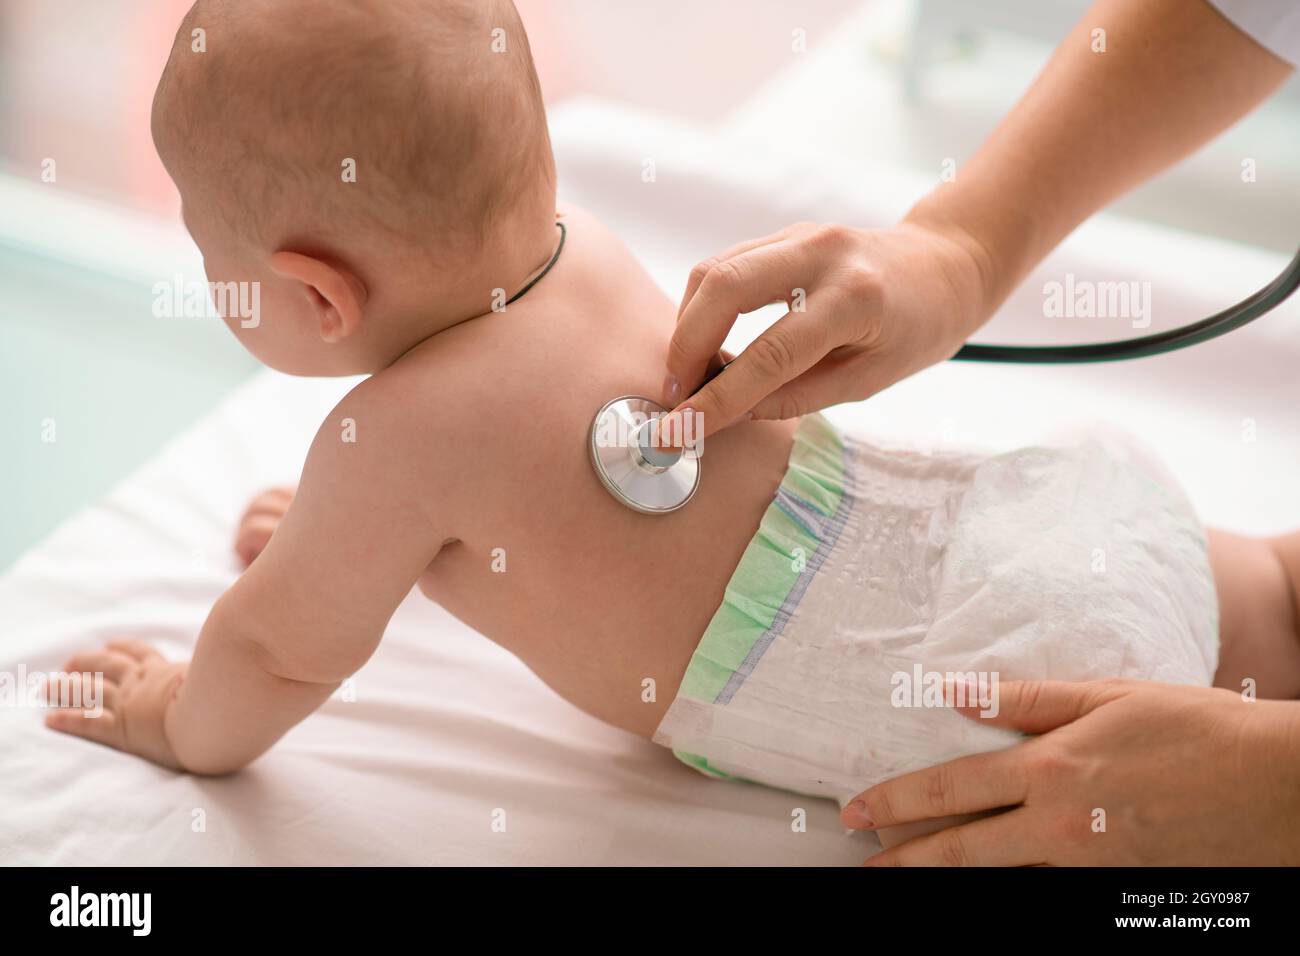 Baby undergoing the auscultation performed by an experienced doctor Stock Photo